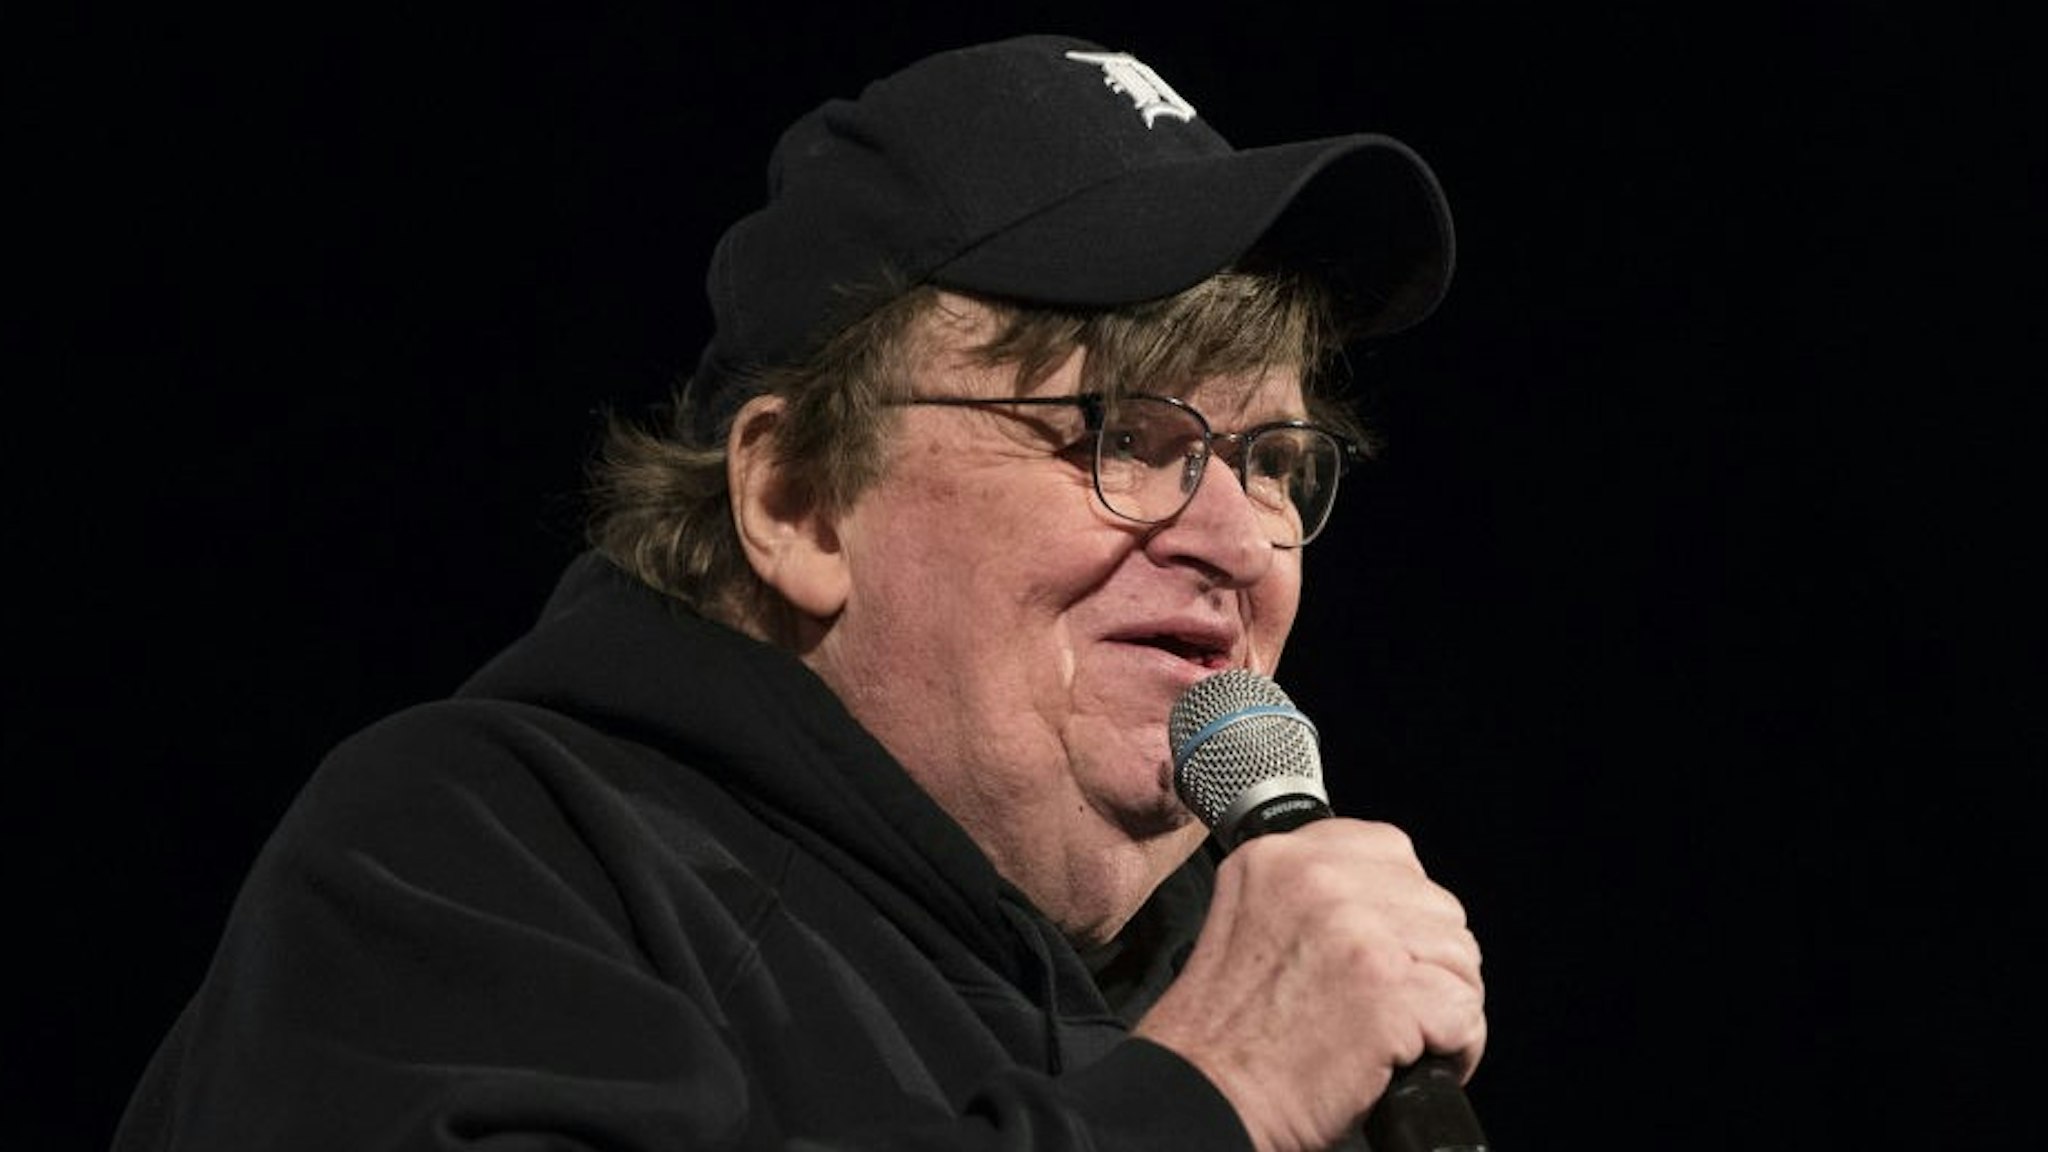 Michael Moore, American filmmaker, speaks during a campaign event for Senator Bernie Sanders, an Independent from Vermont and 2020 presidential candidate, during a town hall event in Rochester, New Hampshire, U.S., on Saturday, Feb. 8, 2020. Sanders is favored to win New Hampshire, but recent polls showed Pete Buttigieg cutting into his lead. Photographer: